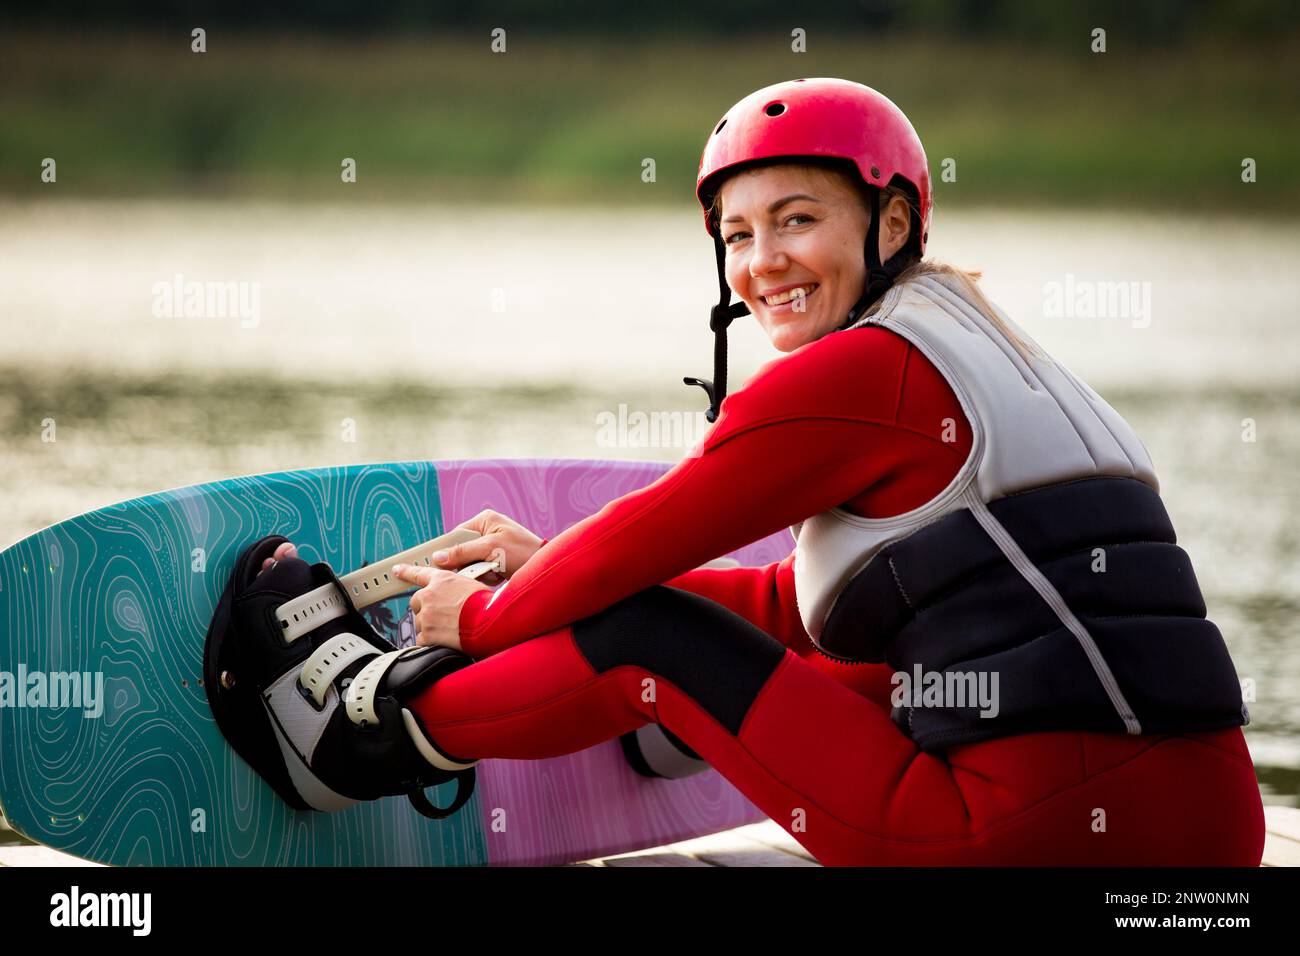 Woman in wetsuit, helmet and life vest sitting with wakeboard on a wooden pier. Sunny summer day. Safety in sport. Water sports in Finland. Insurance Stock Photo